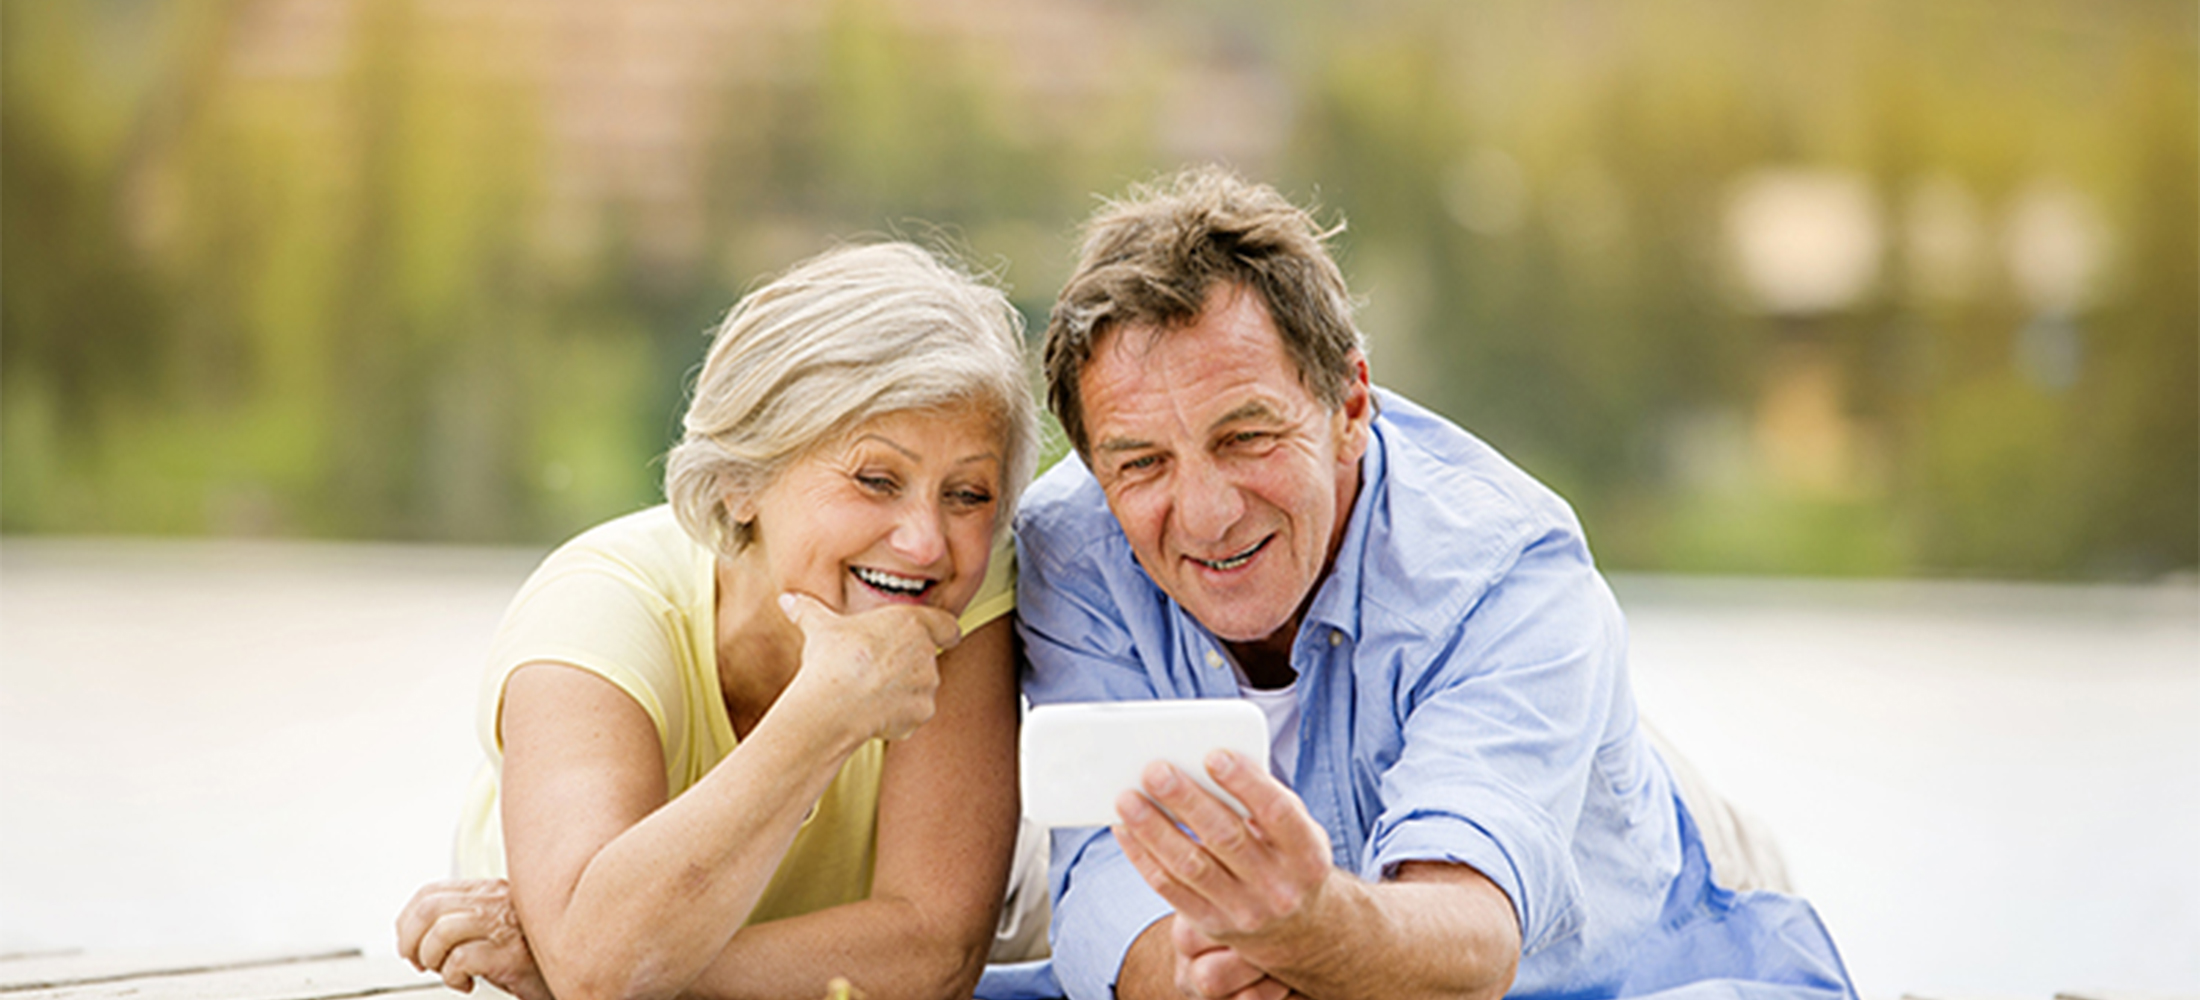 how will an aging population change real estate investment